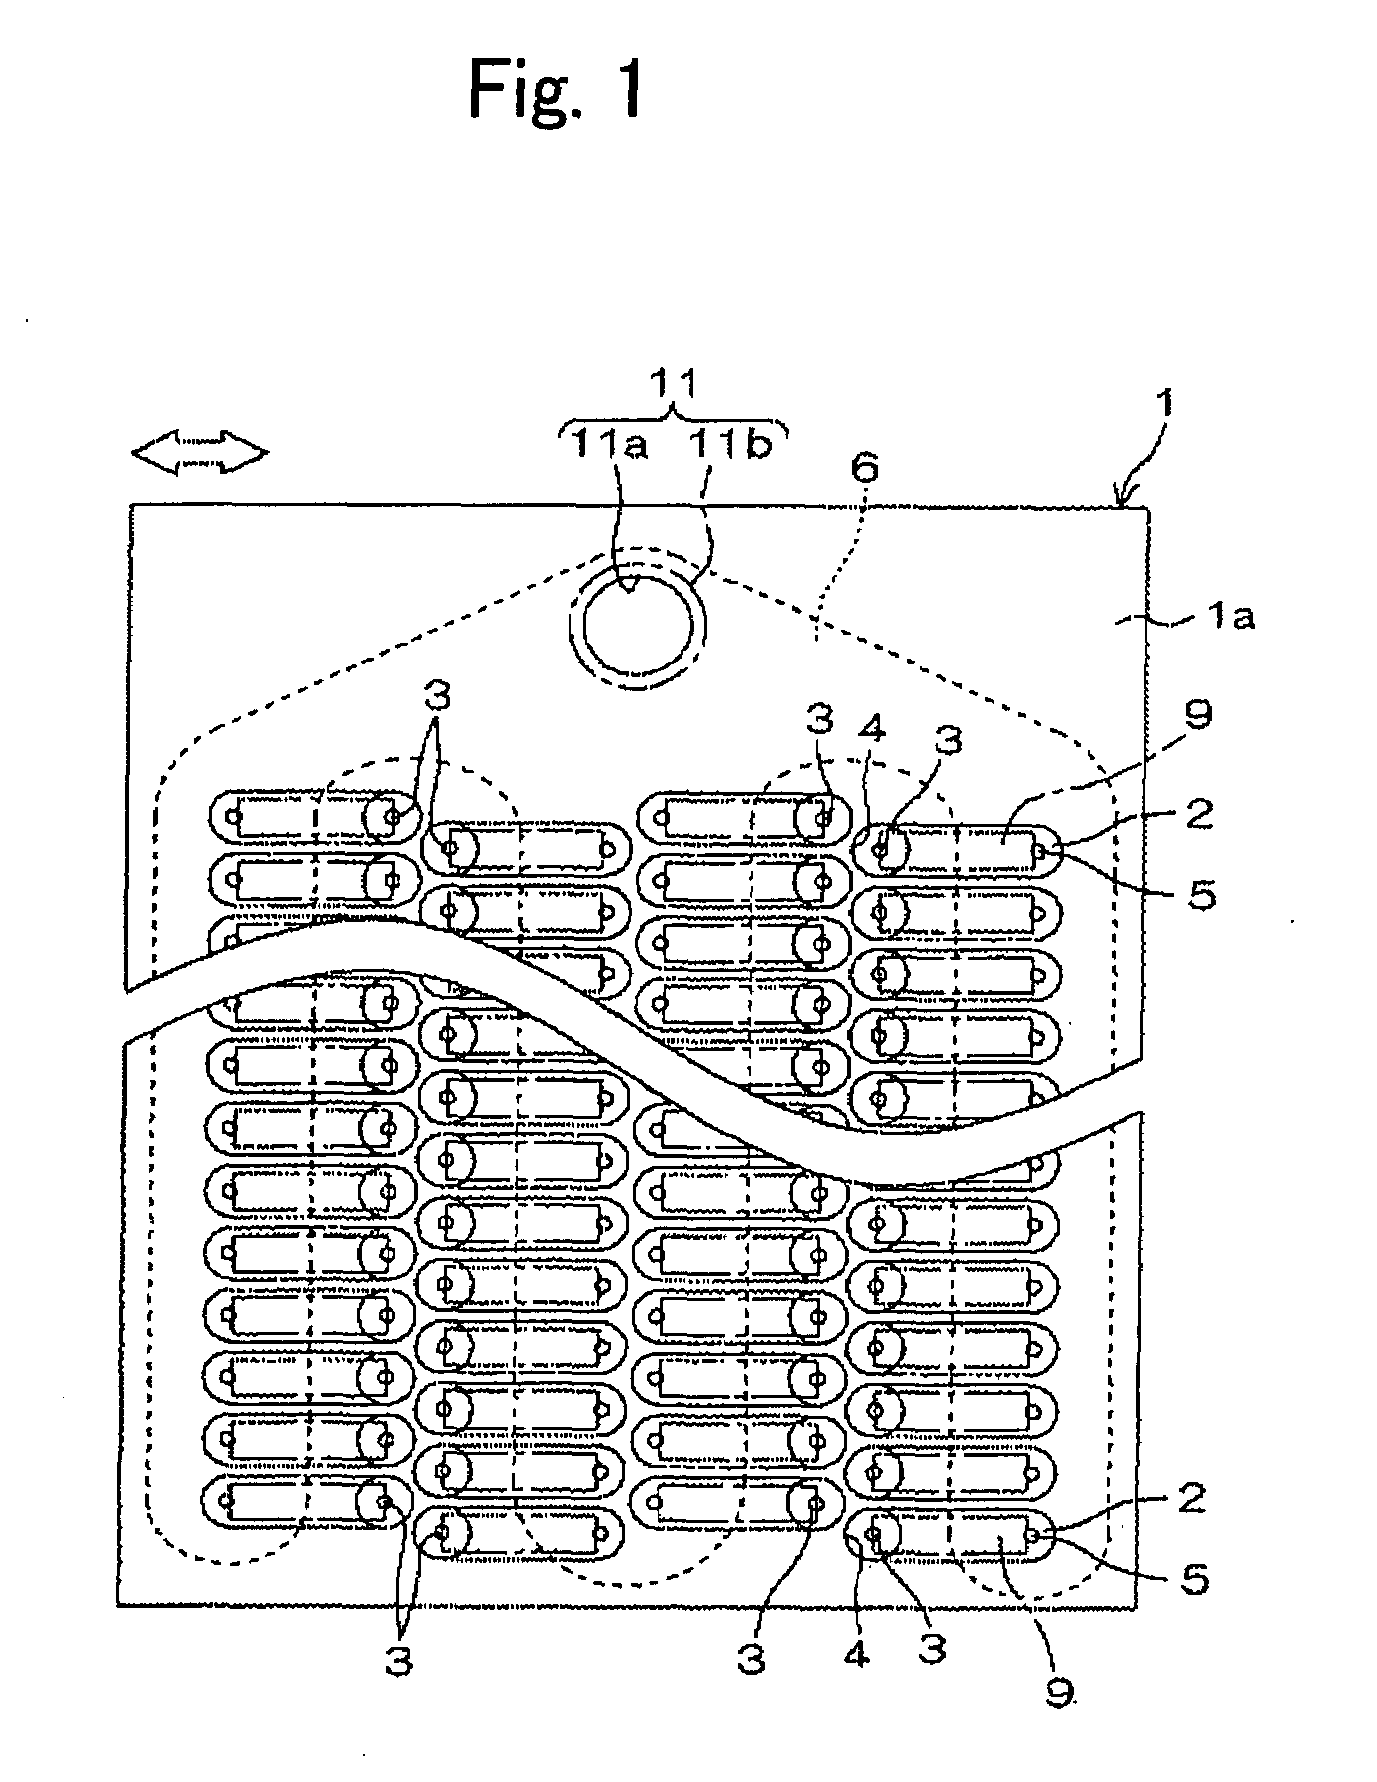 Inkjet recording system and recording apparatus